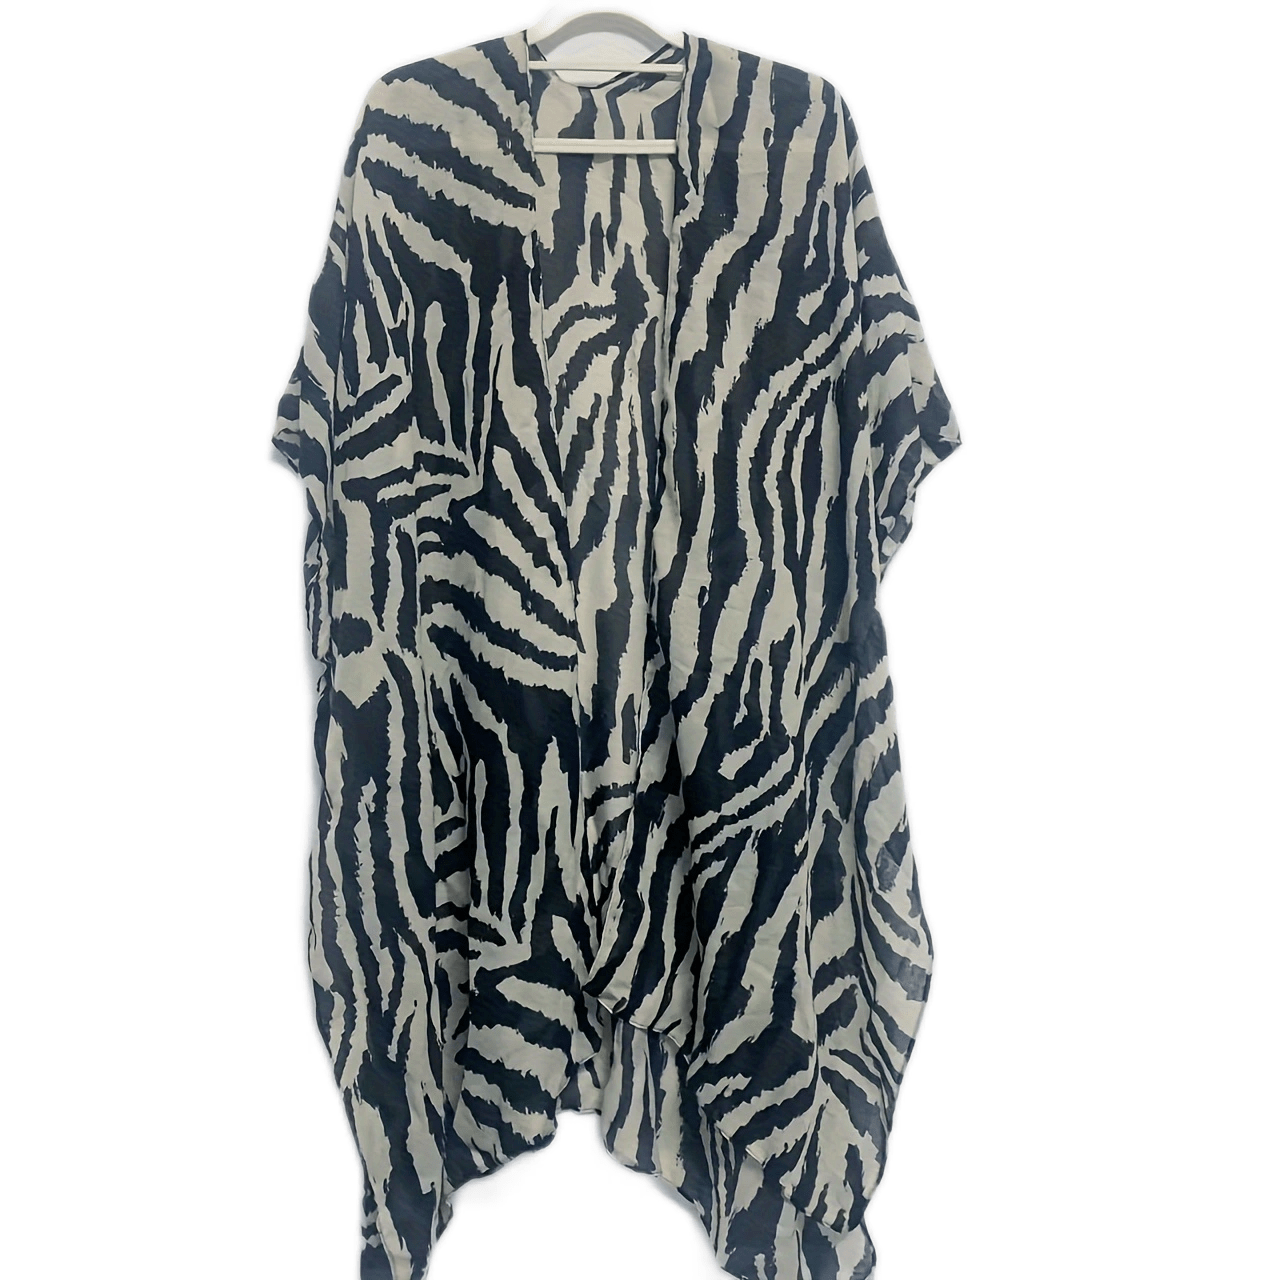 

Classic Zebra Print Large Shawl Elegant Black & Whiter Beach Cover Up Windproof Sunscreen Cape For Women Travel Outdoor